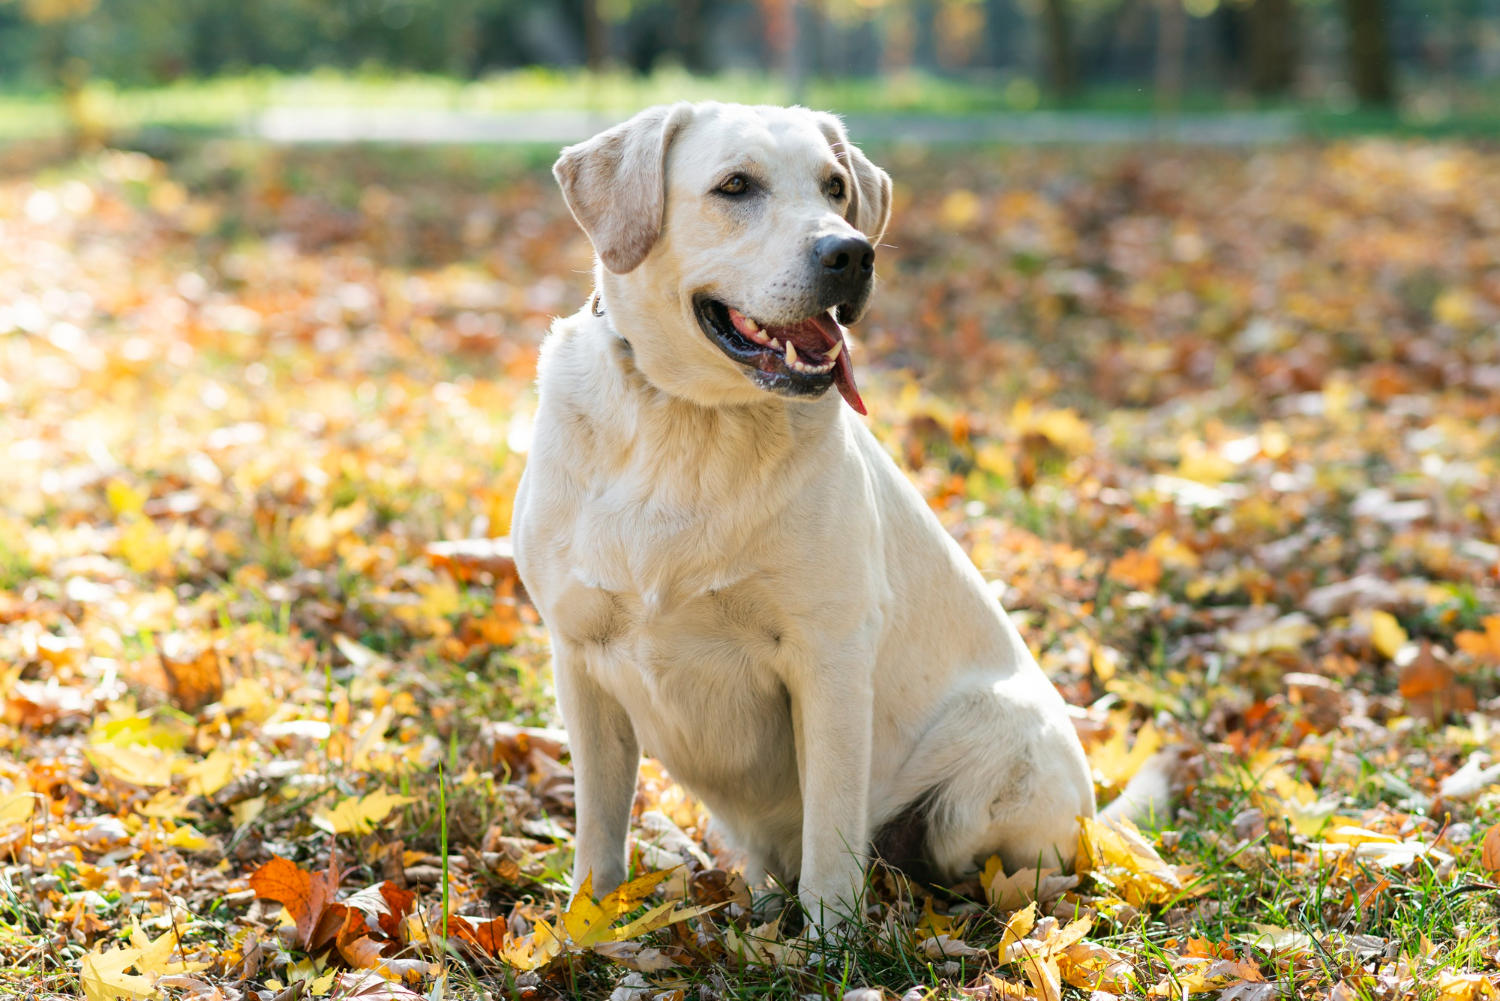 Exercise Requirements for Labrador Retrievers: How Much Exercise Does Your Lab Need?